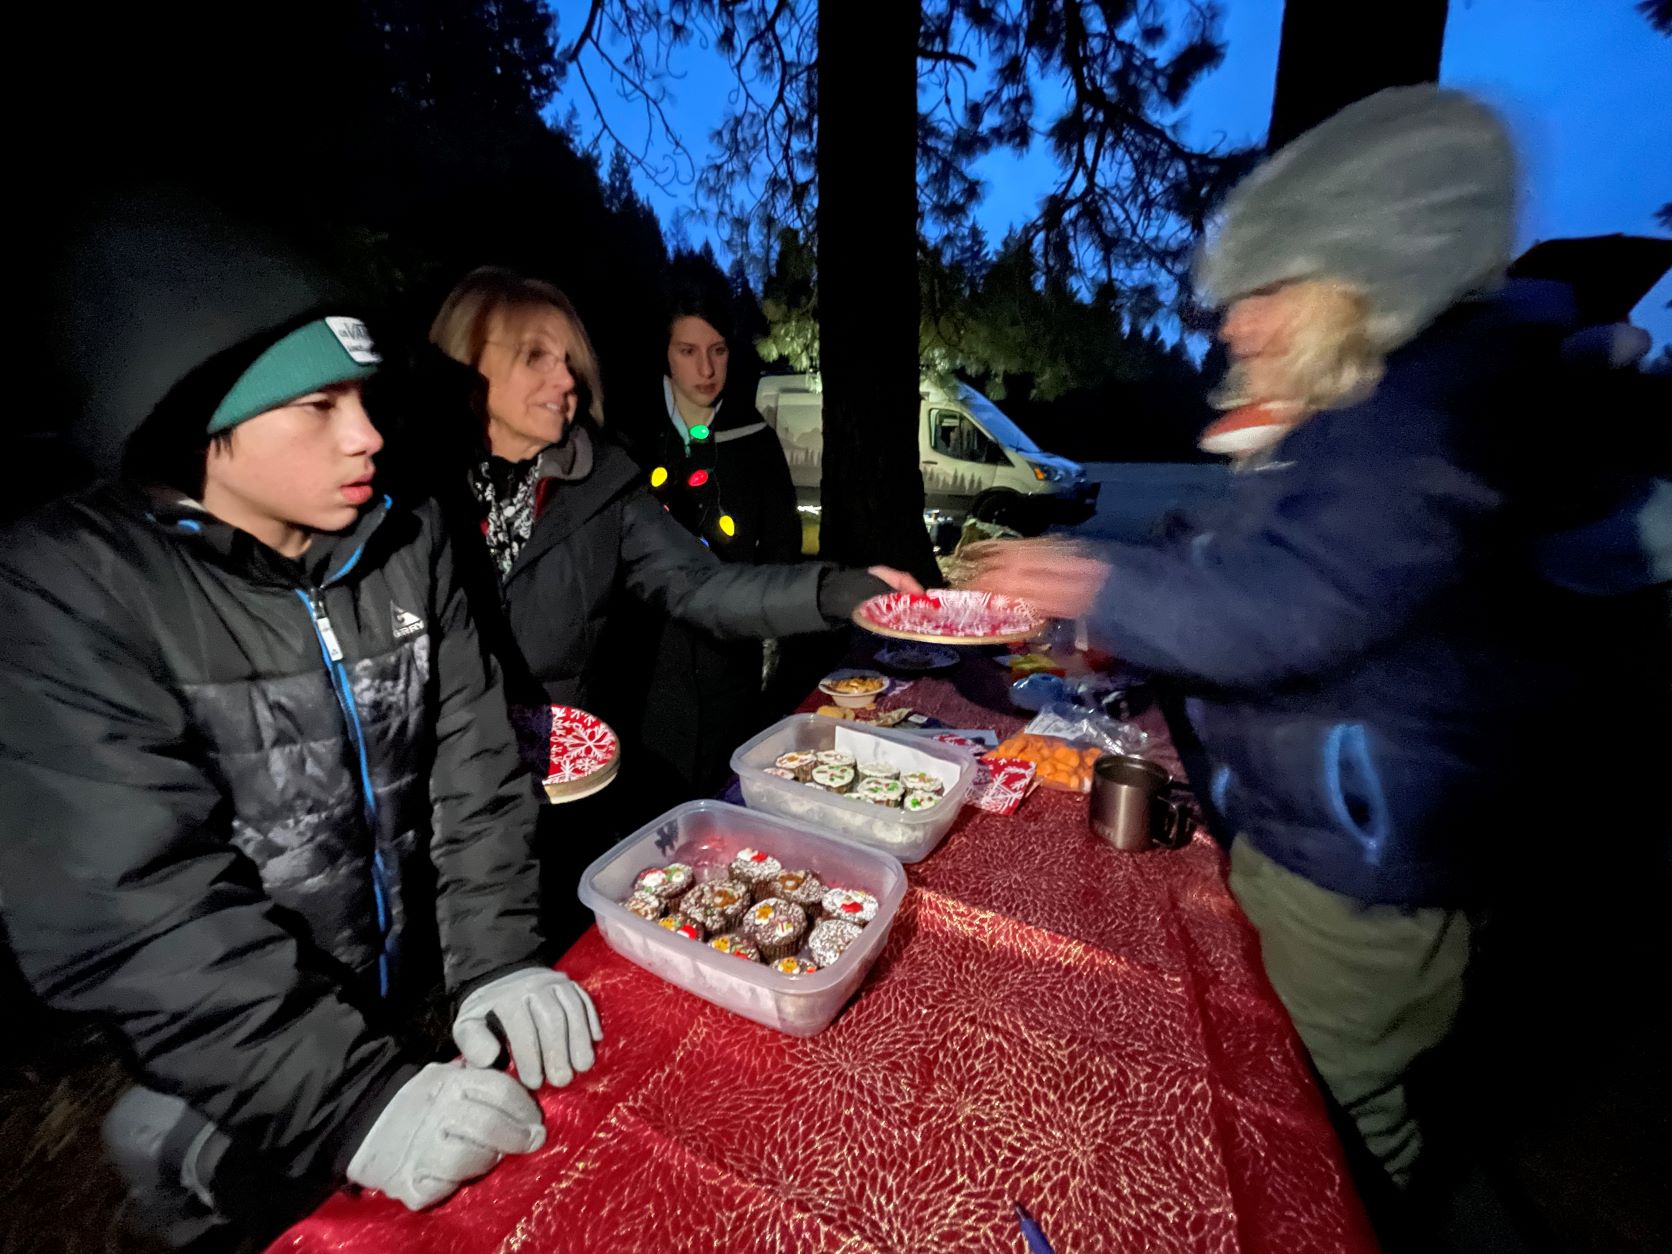 Food buffet line at an outdoor party, with guests dressed in warm jackets, hats, and gloves.